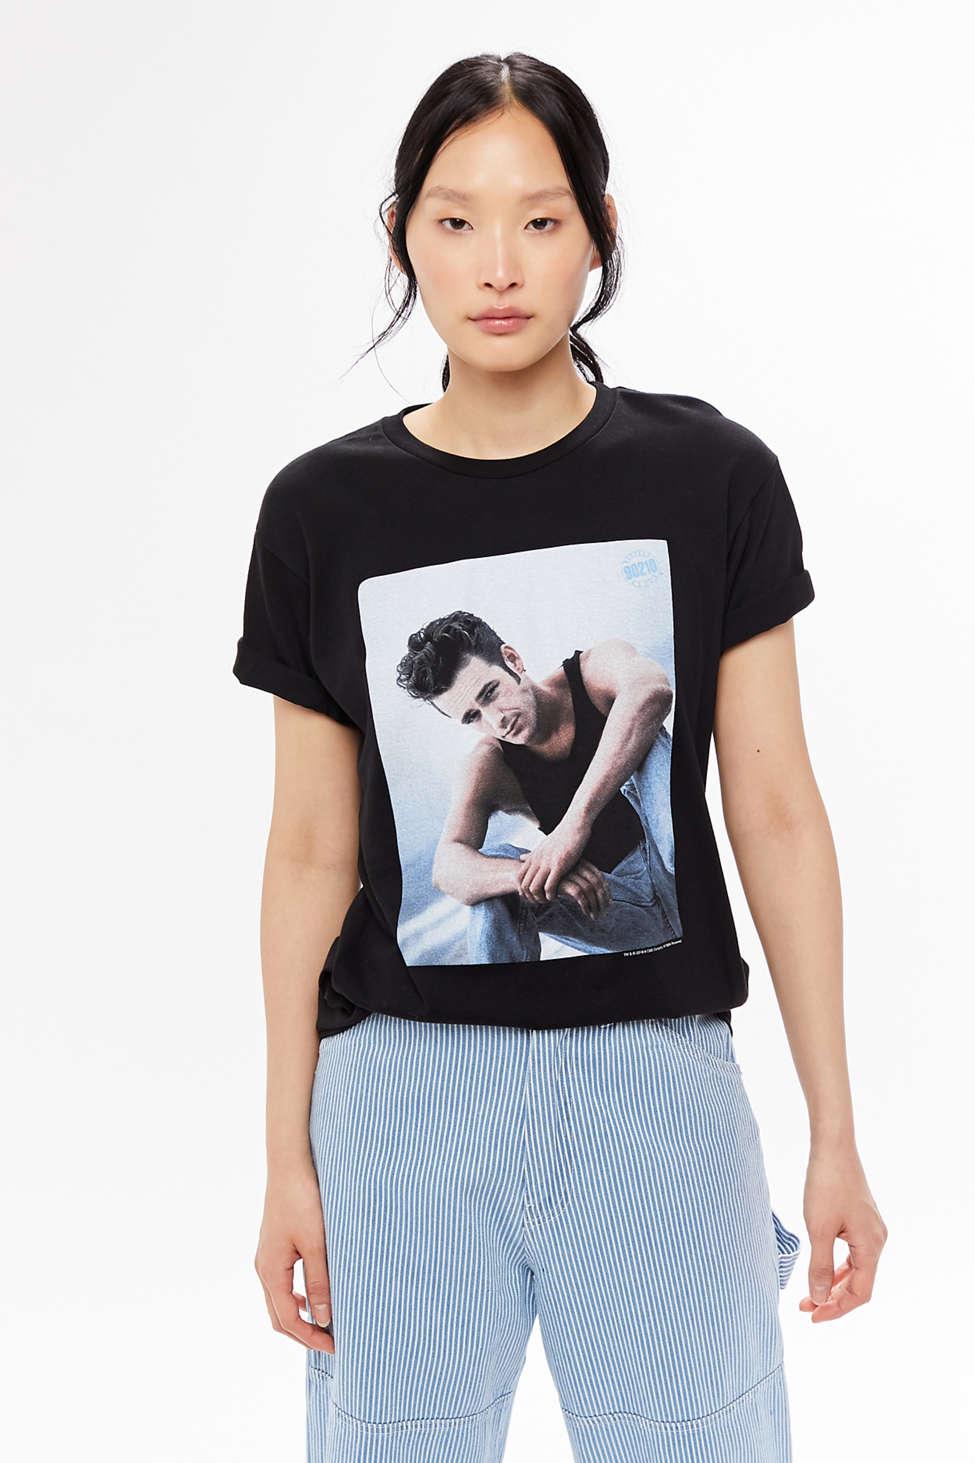 Urban Outfitters Cotton Beverly Hills 90210 Dylan Tee in Black - Lyst